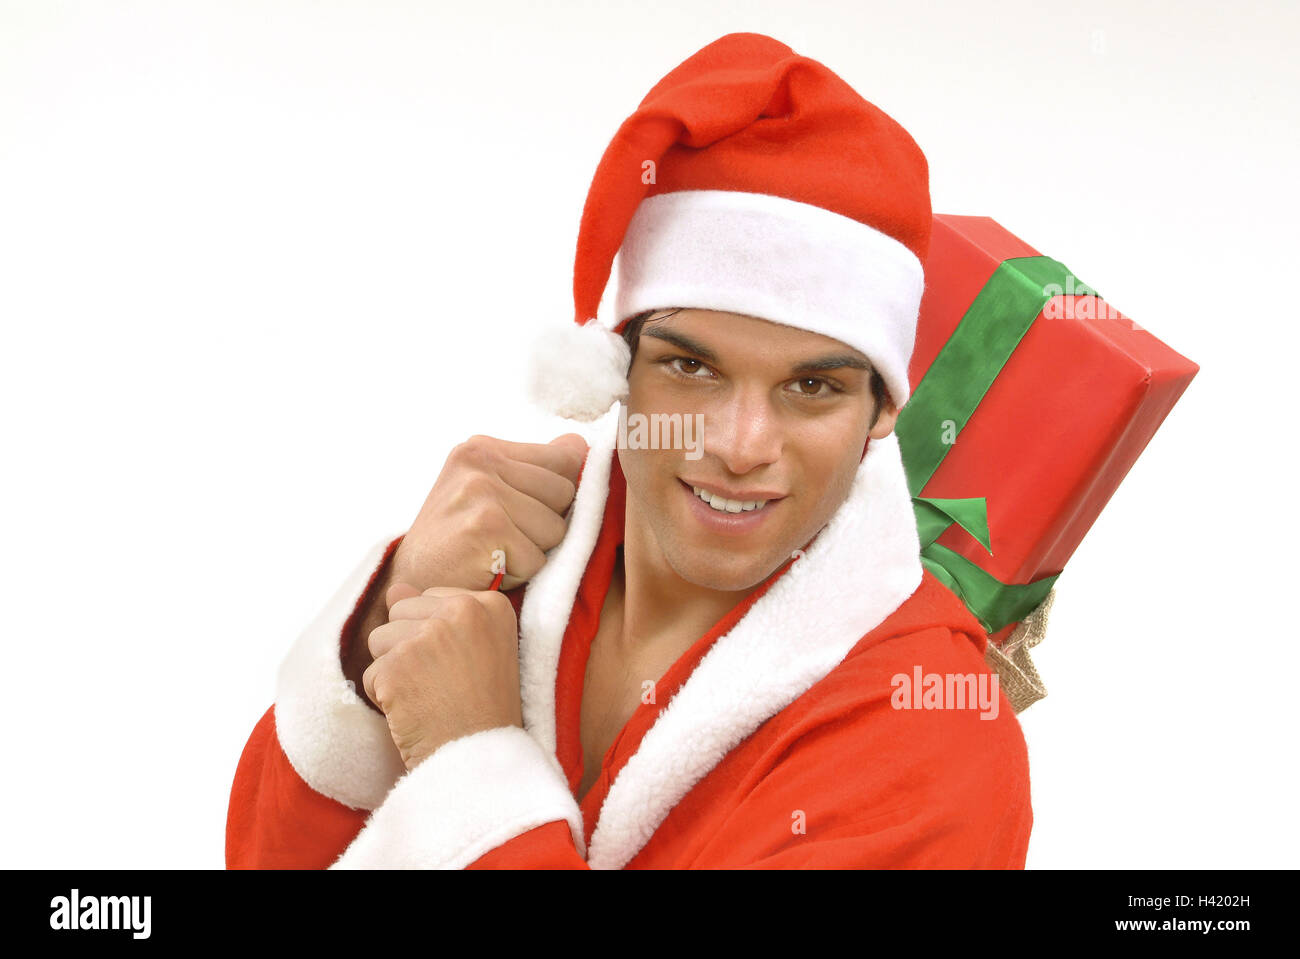 Man, young, Santa's costume, packages, carry, portrait, man's portrait, 20-30 years, dark-haired, person, smile, bring friendly, happy, view camera, Santa's hat, Christmas cap, pointed cap, headgear, Santa Claus, Santa Claus, Santa, present, Christmas pre Stock Photo